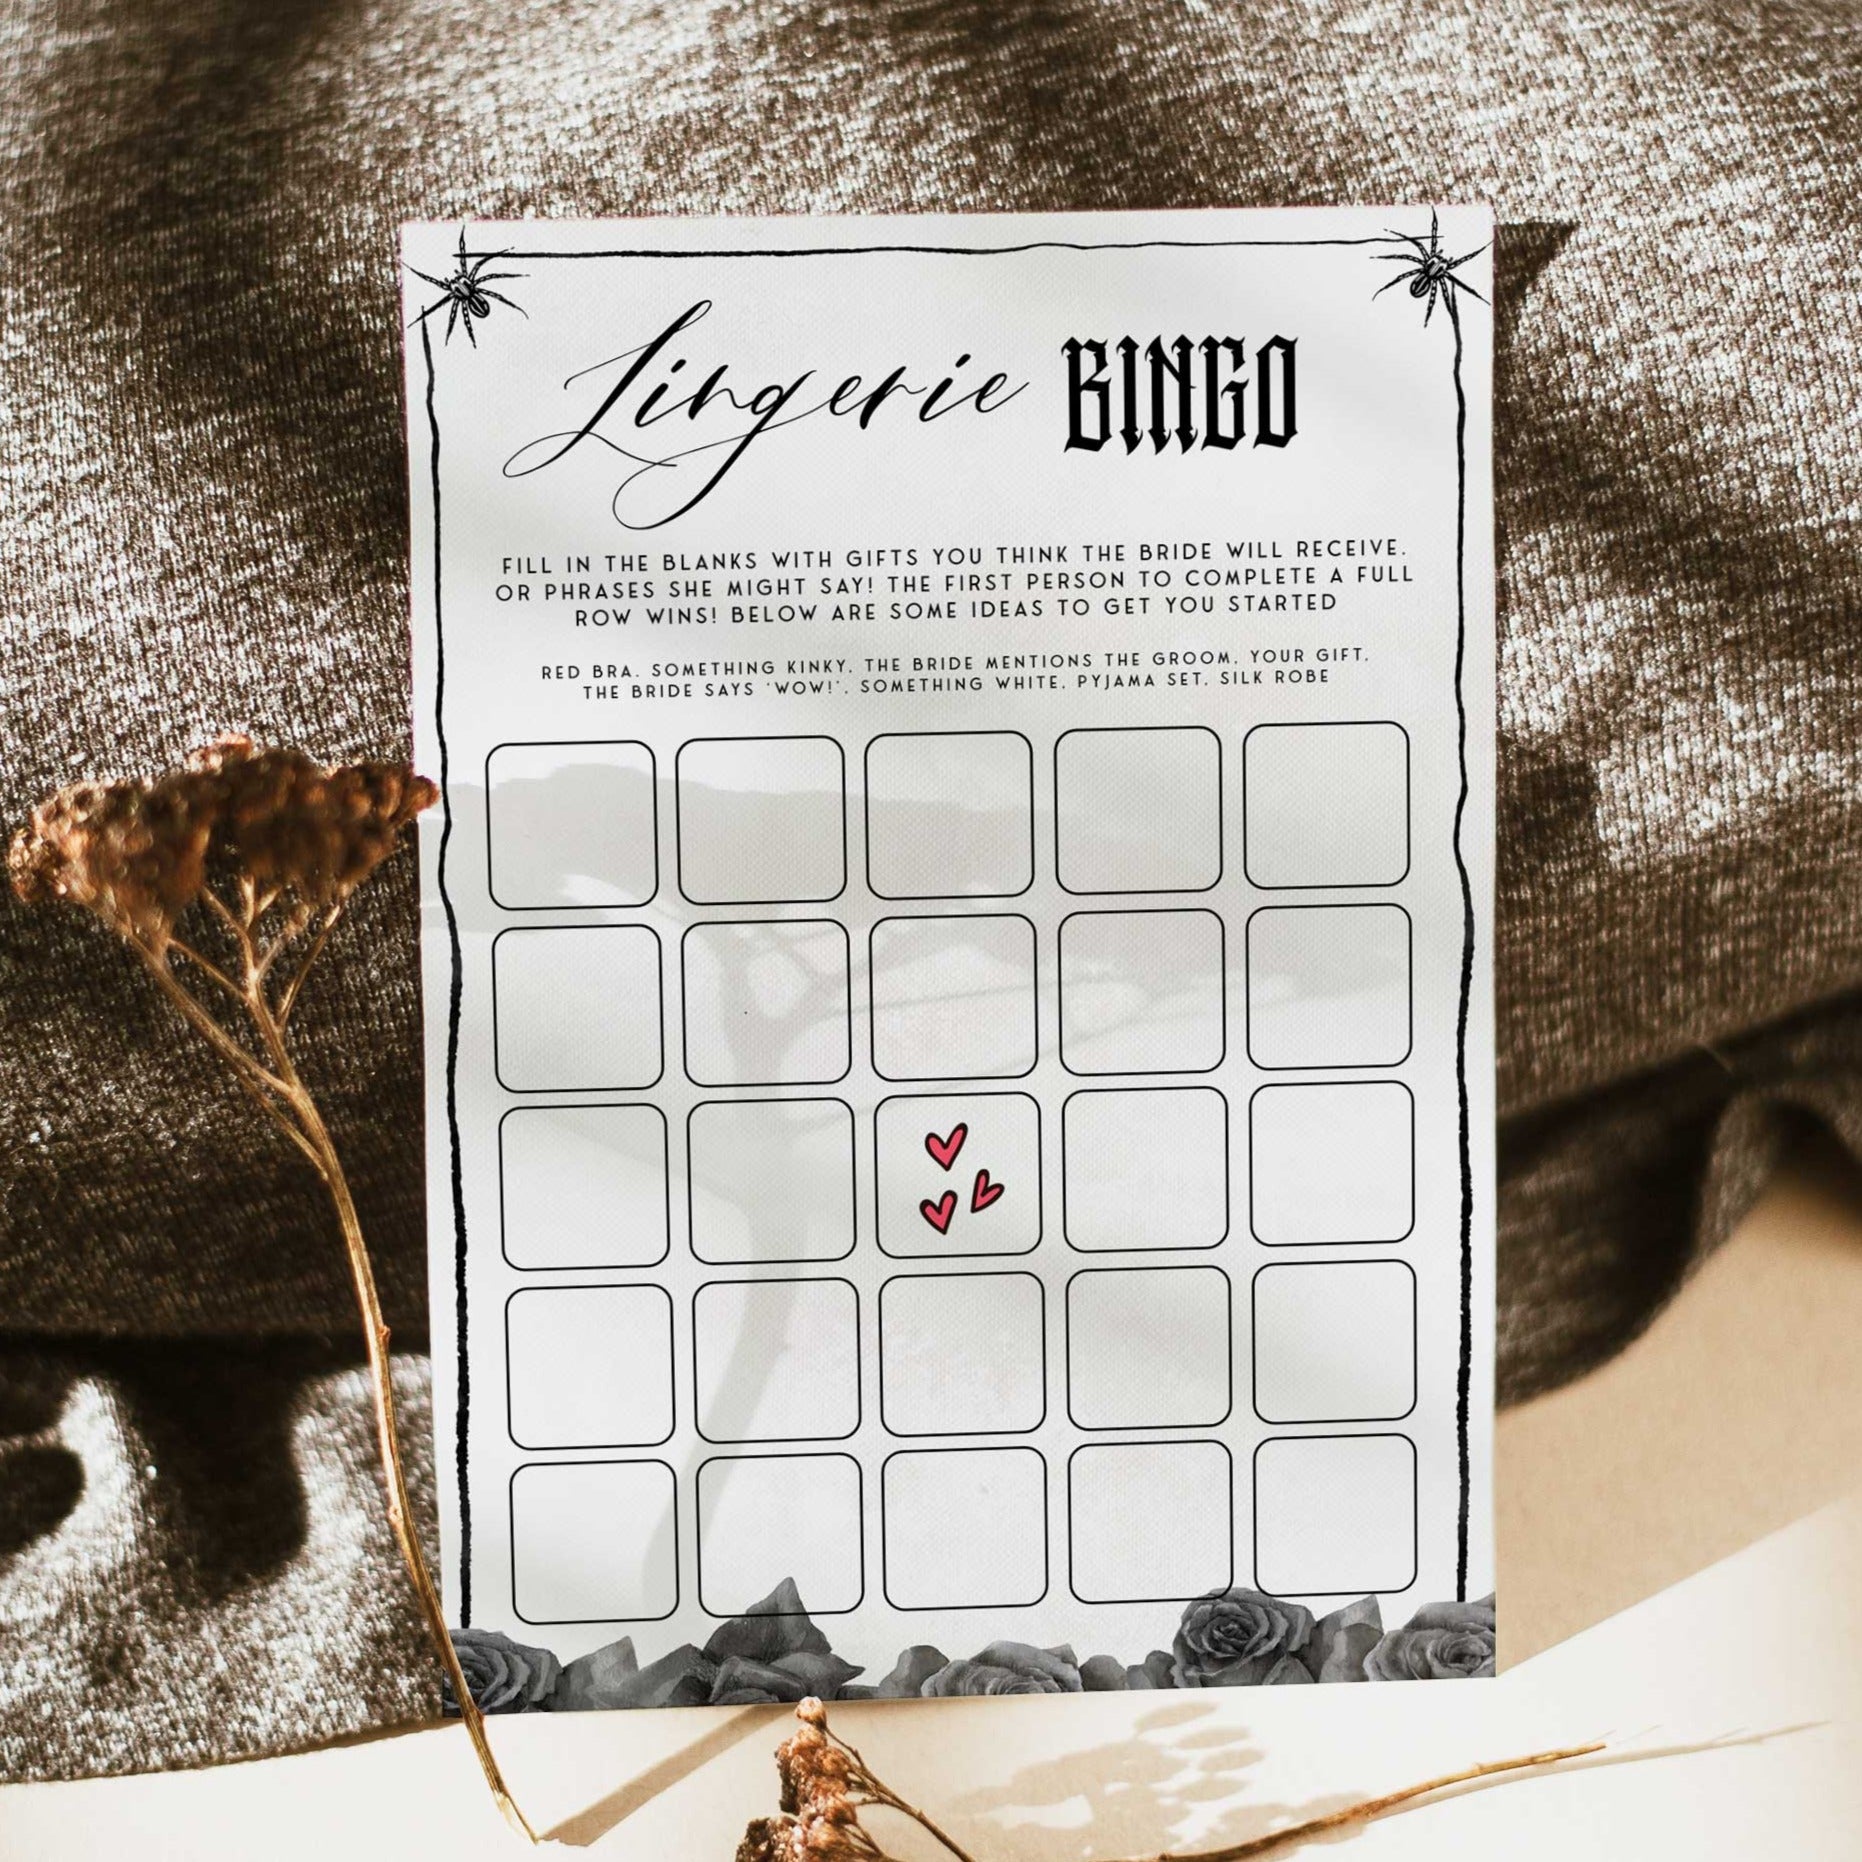 Fully editable and printable bridal shower lingerie bingo game with a gothic design. Perfect for a Bride or Die or Death Us To Party bridal shower themed party